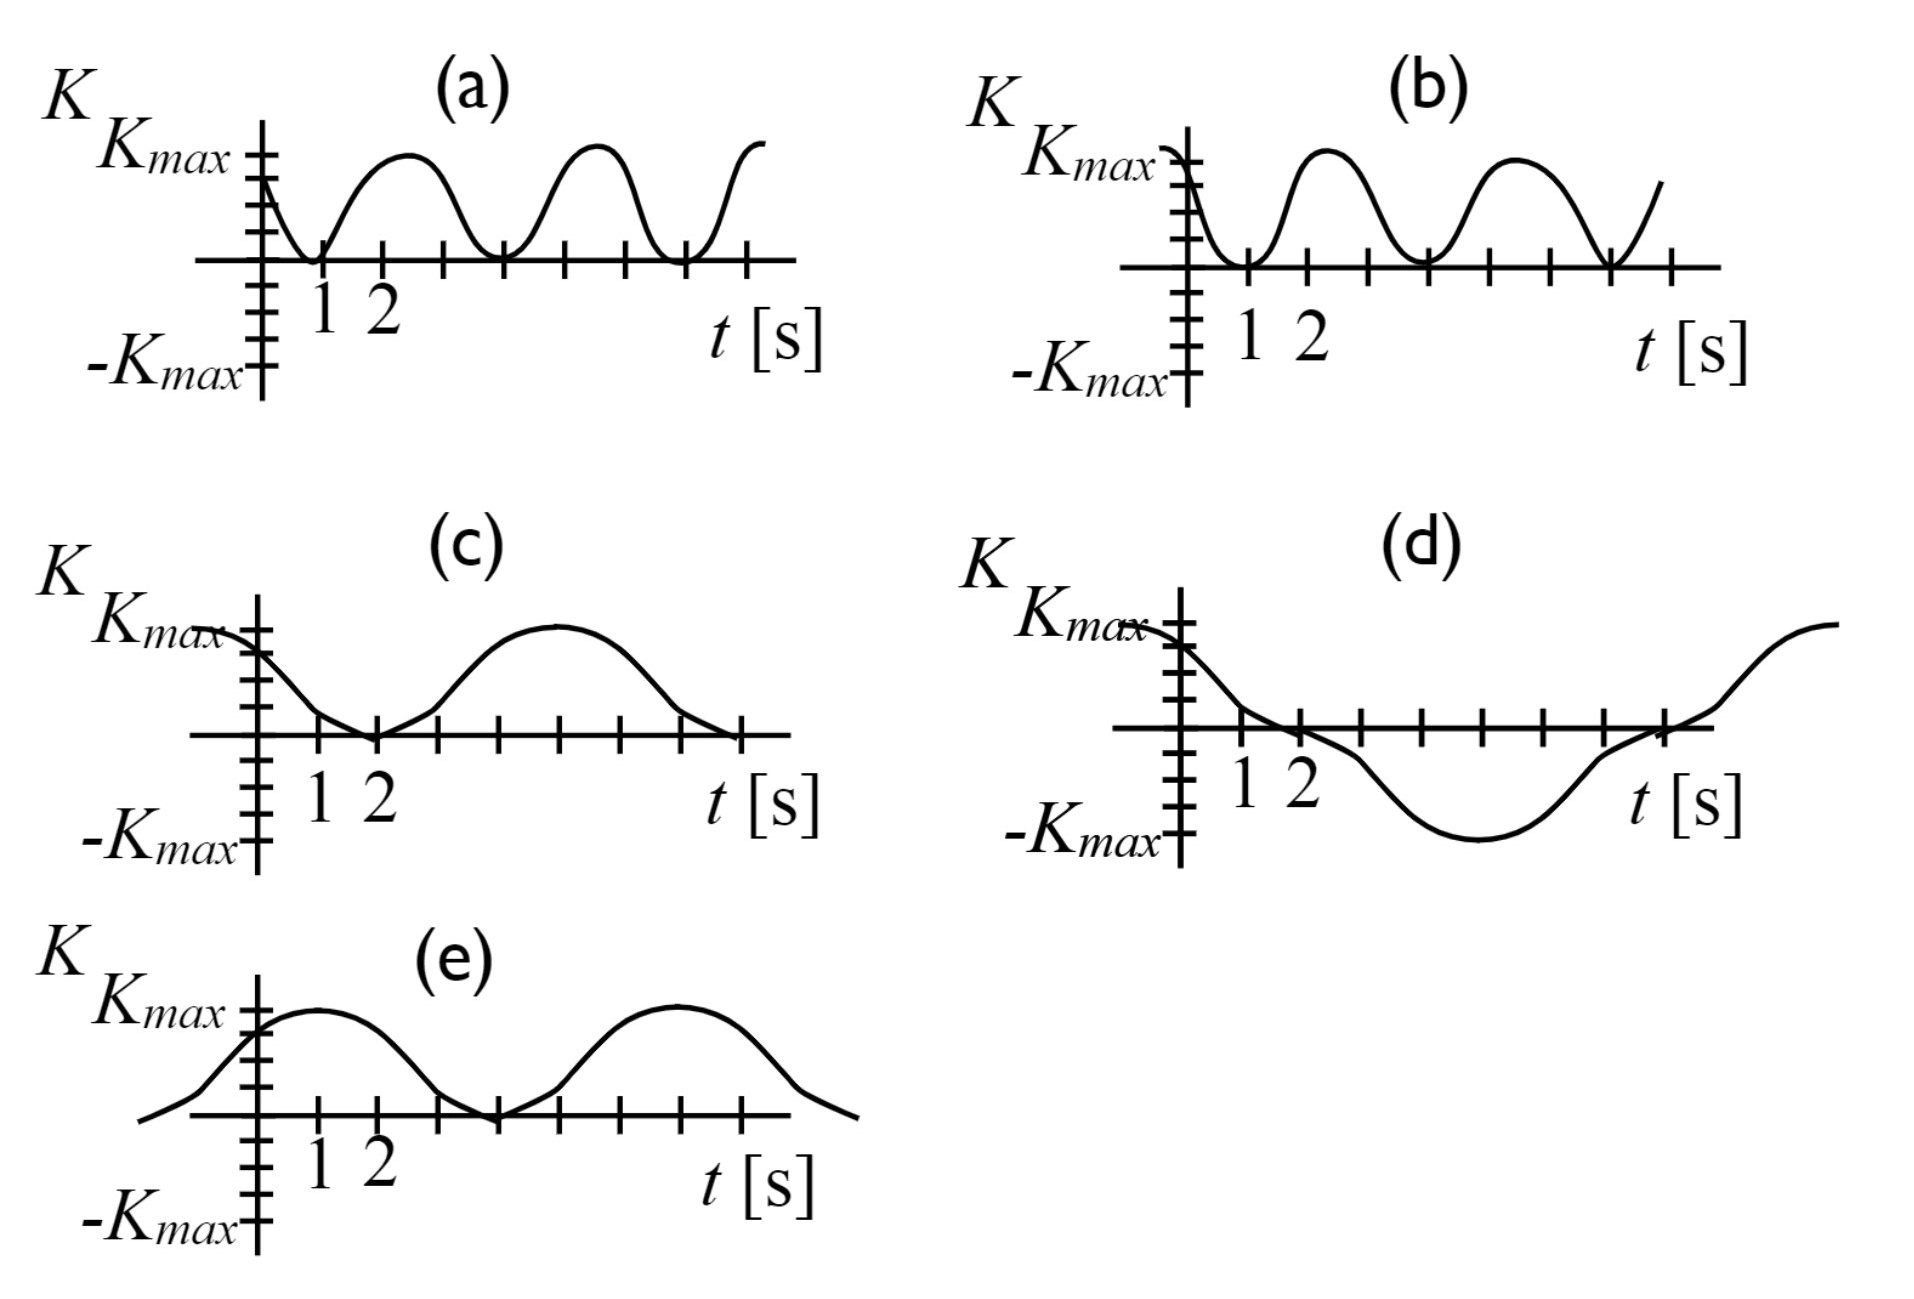 Image of five graphs. The five graphs represent the kinetic energy as a function of time for a simple harmonic oscillator. Graph A shows positive kinetic energy at all times with K = 0 at t = 1s. Graph B shows positive kinetic energy at all times with K = 0 at t = 1s. Graph C shows positive kinetic energy at all times with K = 0 at t = 2s. Graph D shows negative kinetic energy at 2s < t < 8s with K = 0 at t = 2s and t = 8s. Graph E shows positive kinetic energy at all times with K = 0 at t = 4s.